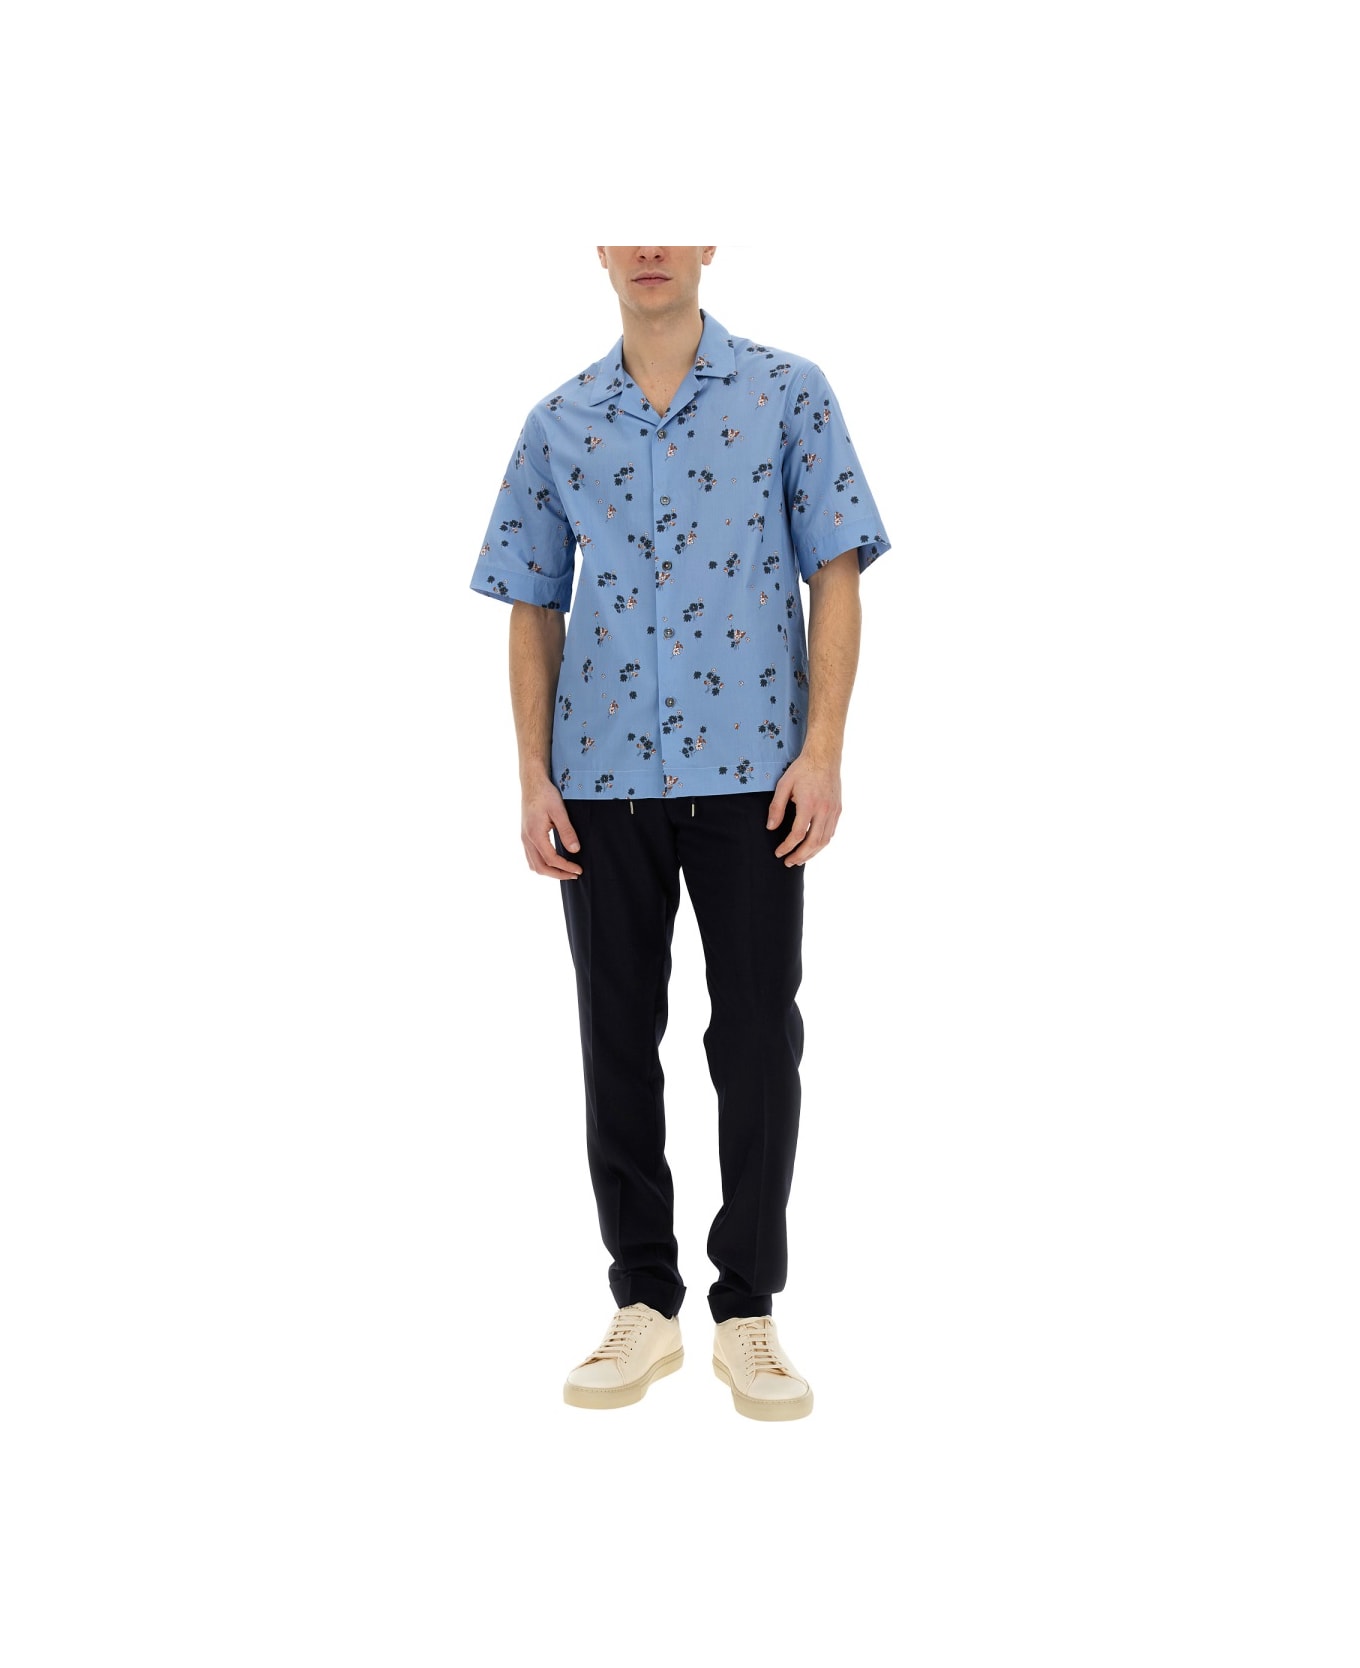 Paul Smith Shirt With Floral Pattern - AZURE